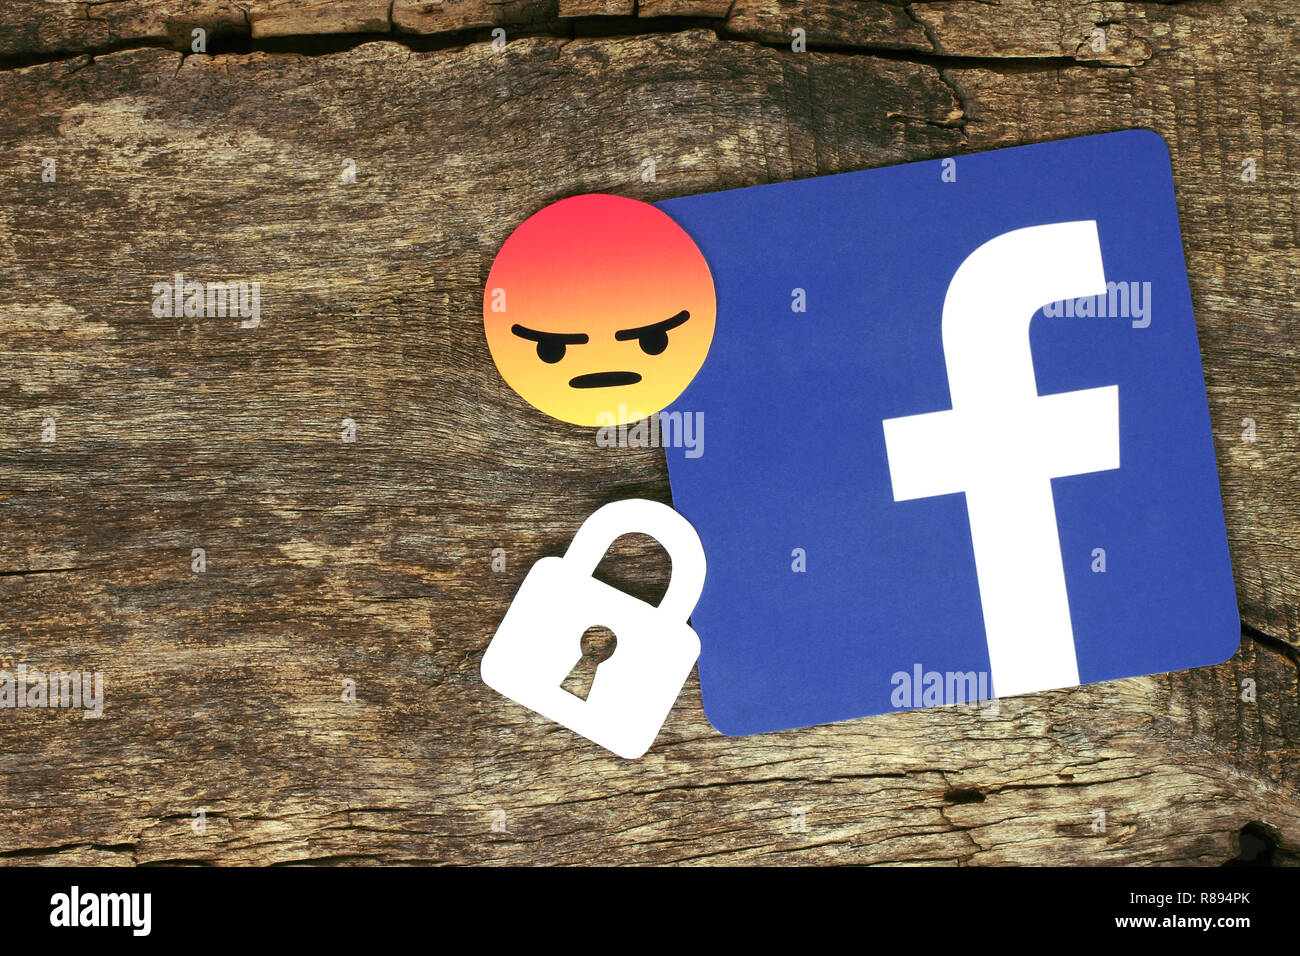 Kiev, Ukraine - May 04, 2017: Facebook icon with lock and angry emoji smile printed on paper and placed on old wooden background. Stock Photo